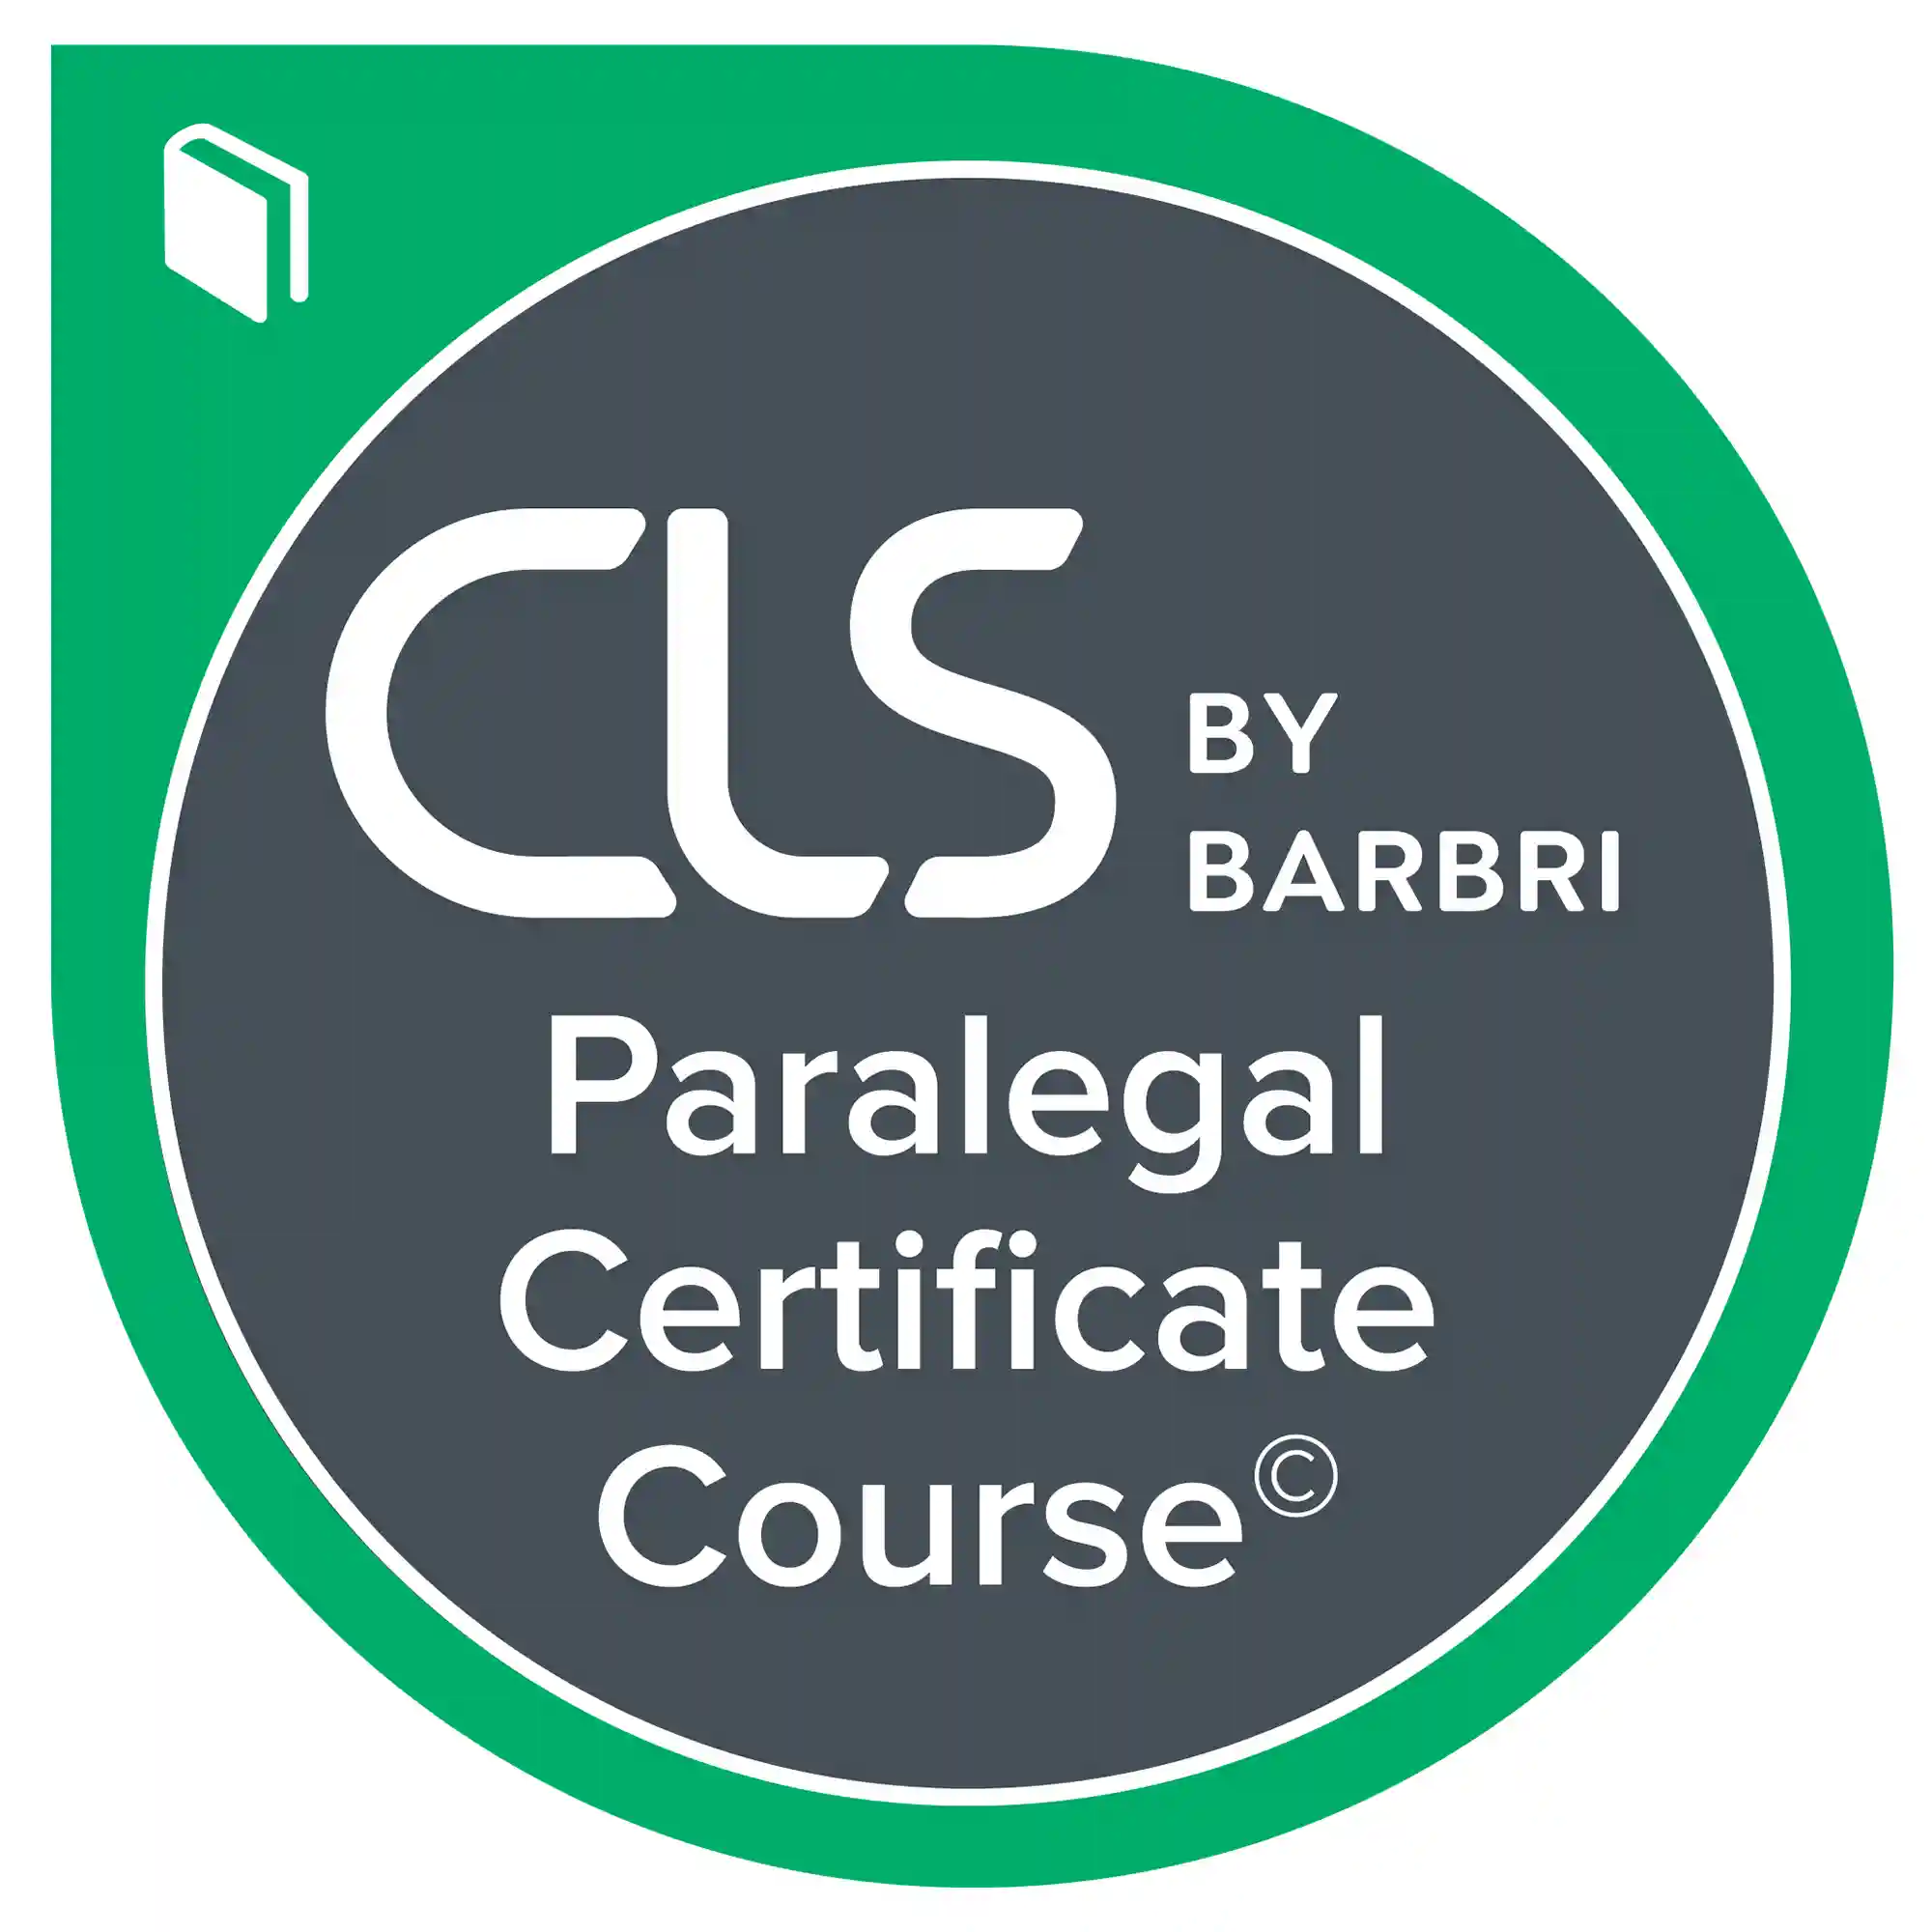 CLS certification